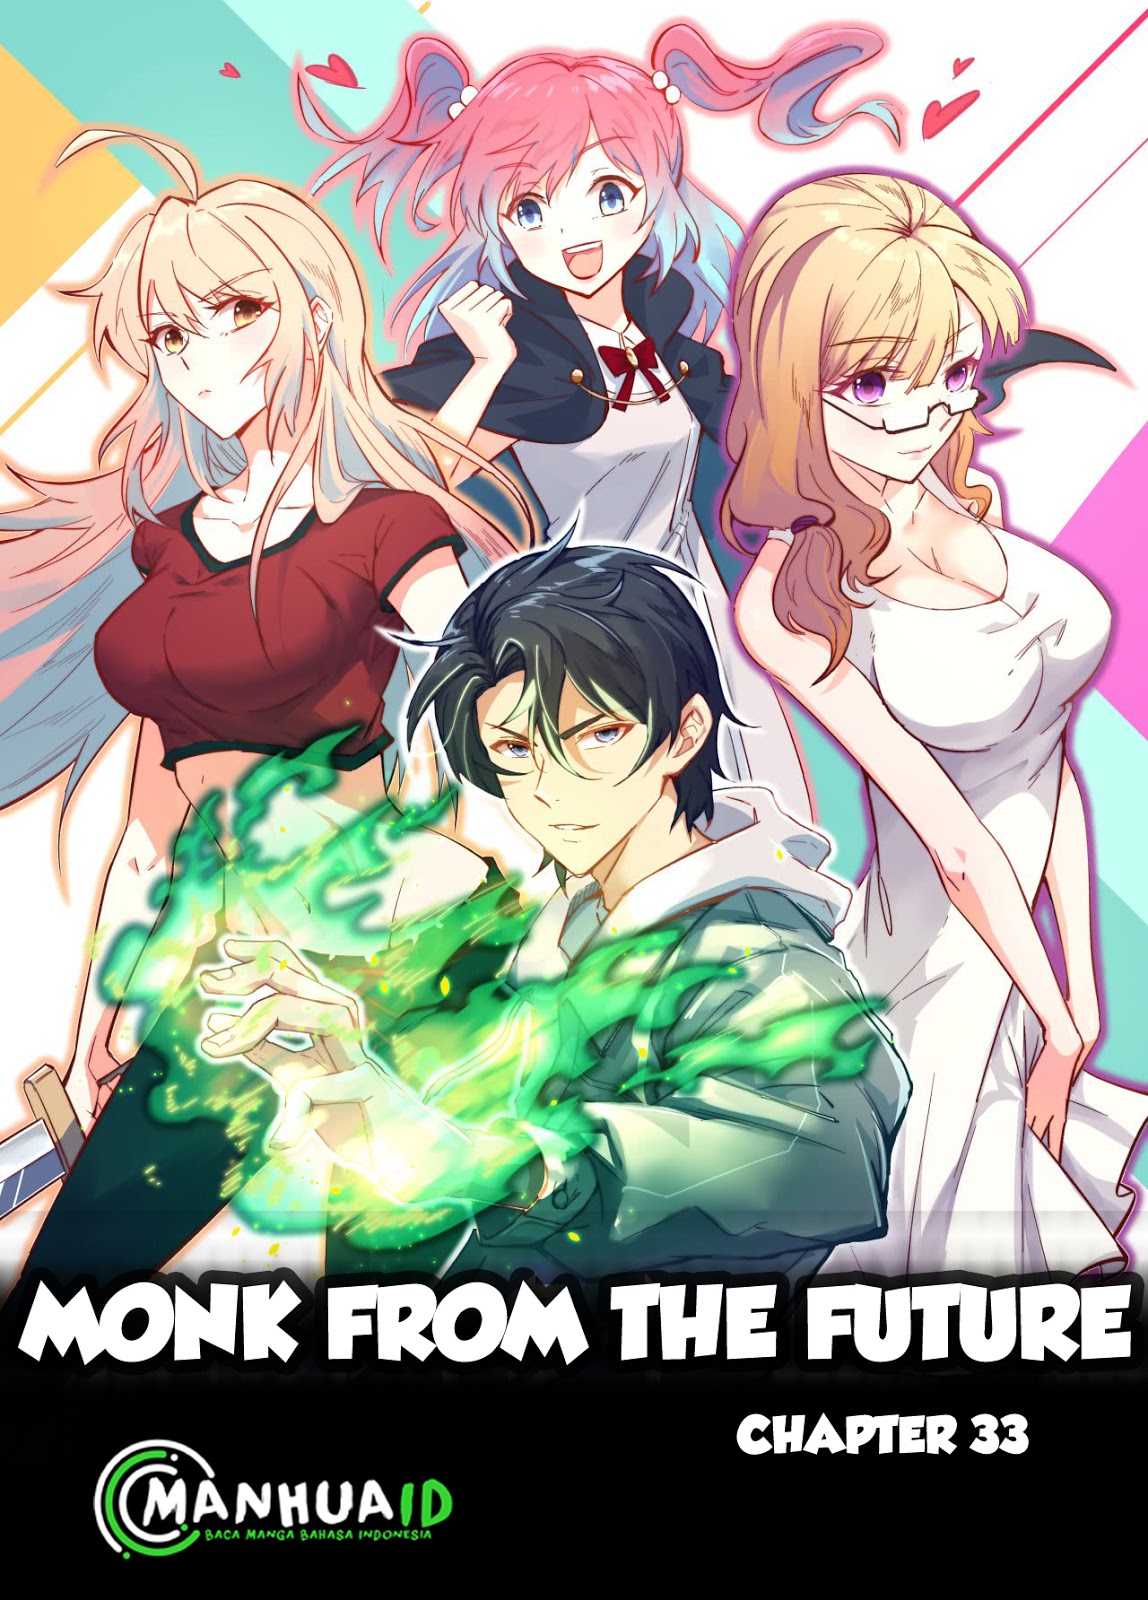 Monk From the Future Chapter 33